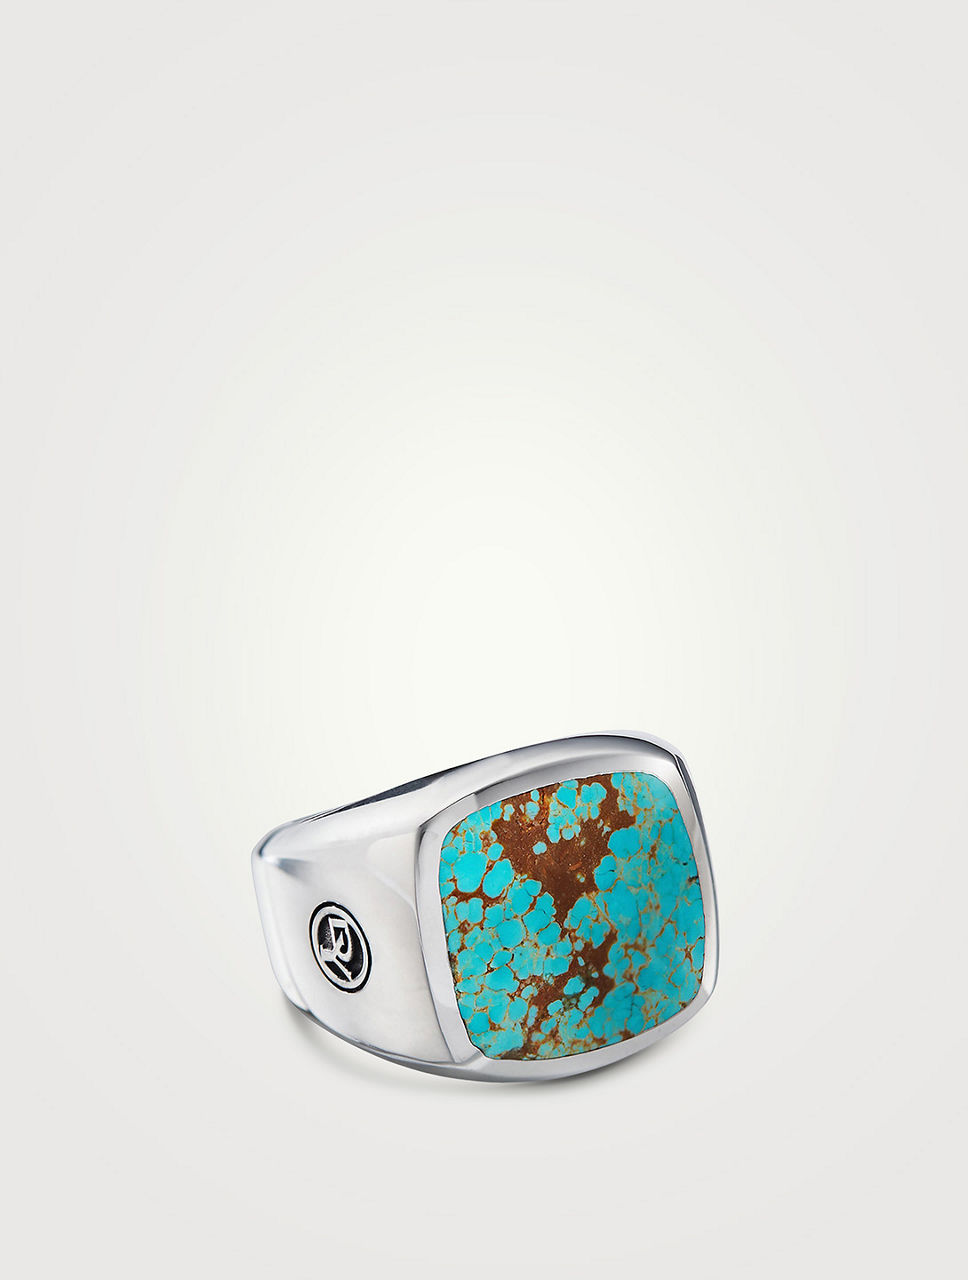 Exotic Stone Signet Ring Sterling Silver With Turquoise